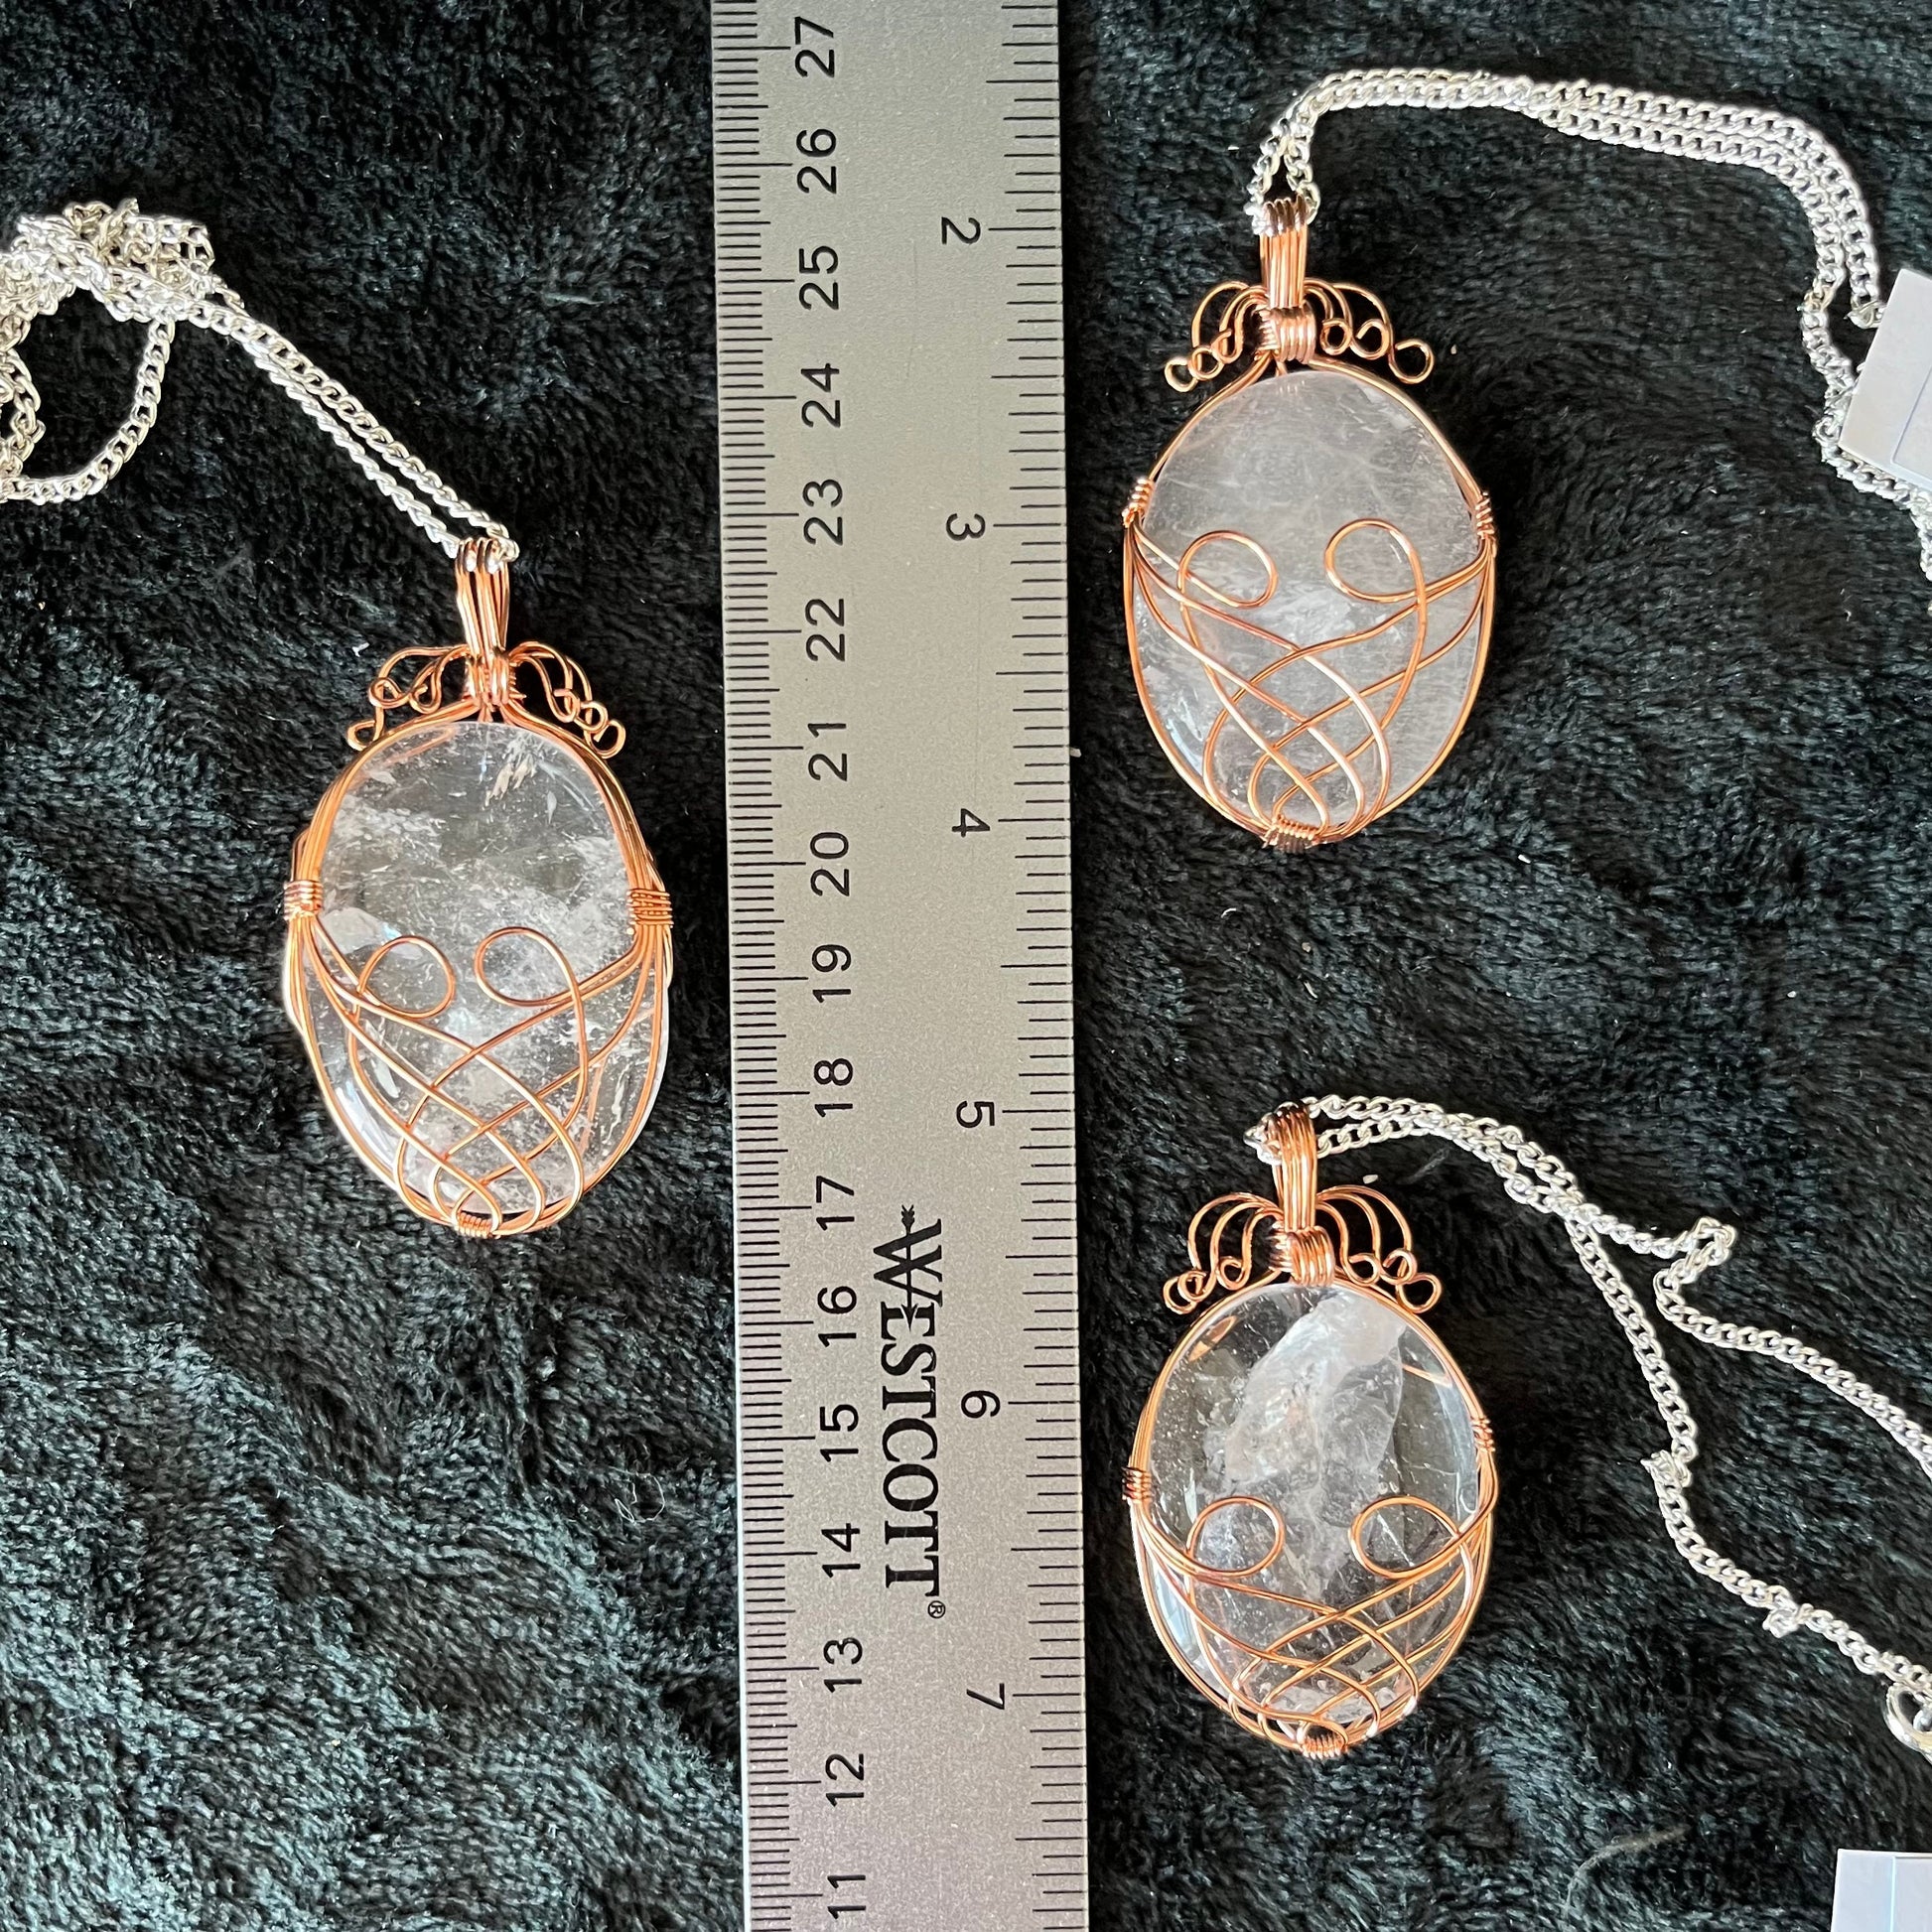 Three copper fancy wire wrapped clear quartz oval stone pendants attatched to a silver chains, displayed against a black background next to a ruler.  eaxh oendant is 1 3/4" -  2 1/4" long